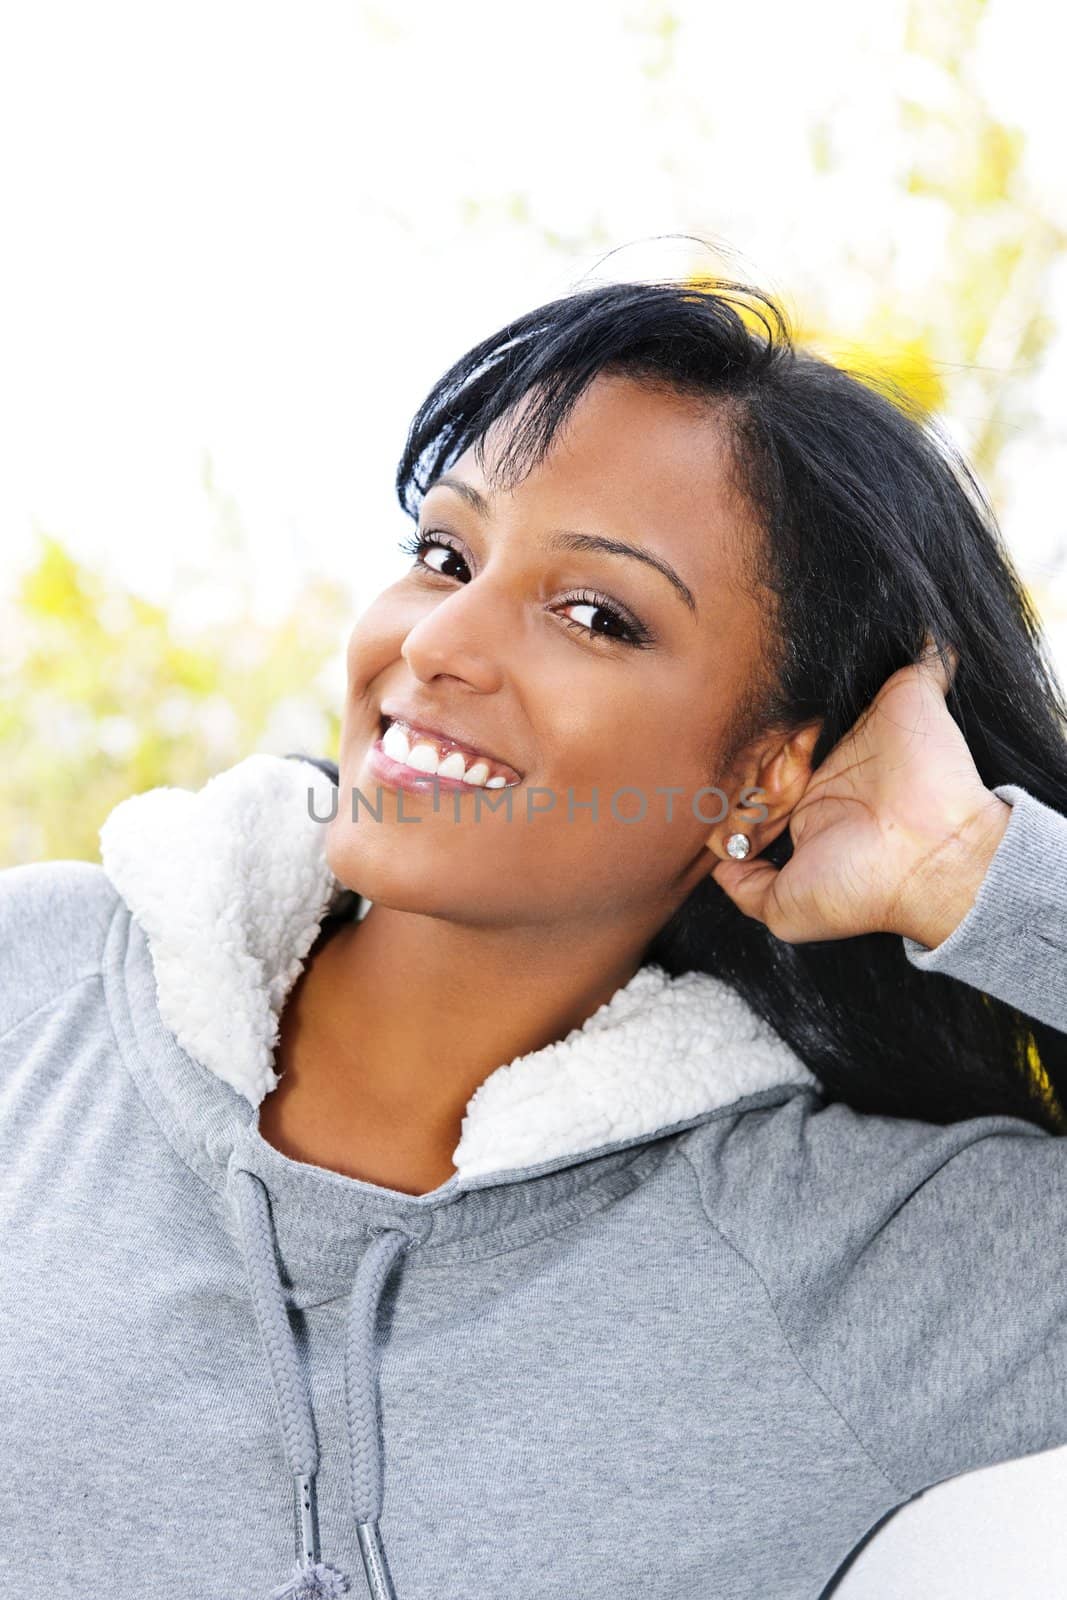 Portrait of happy young black woman outdoors in fall